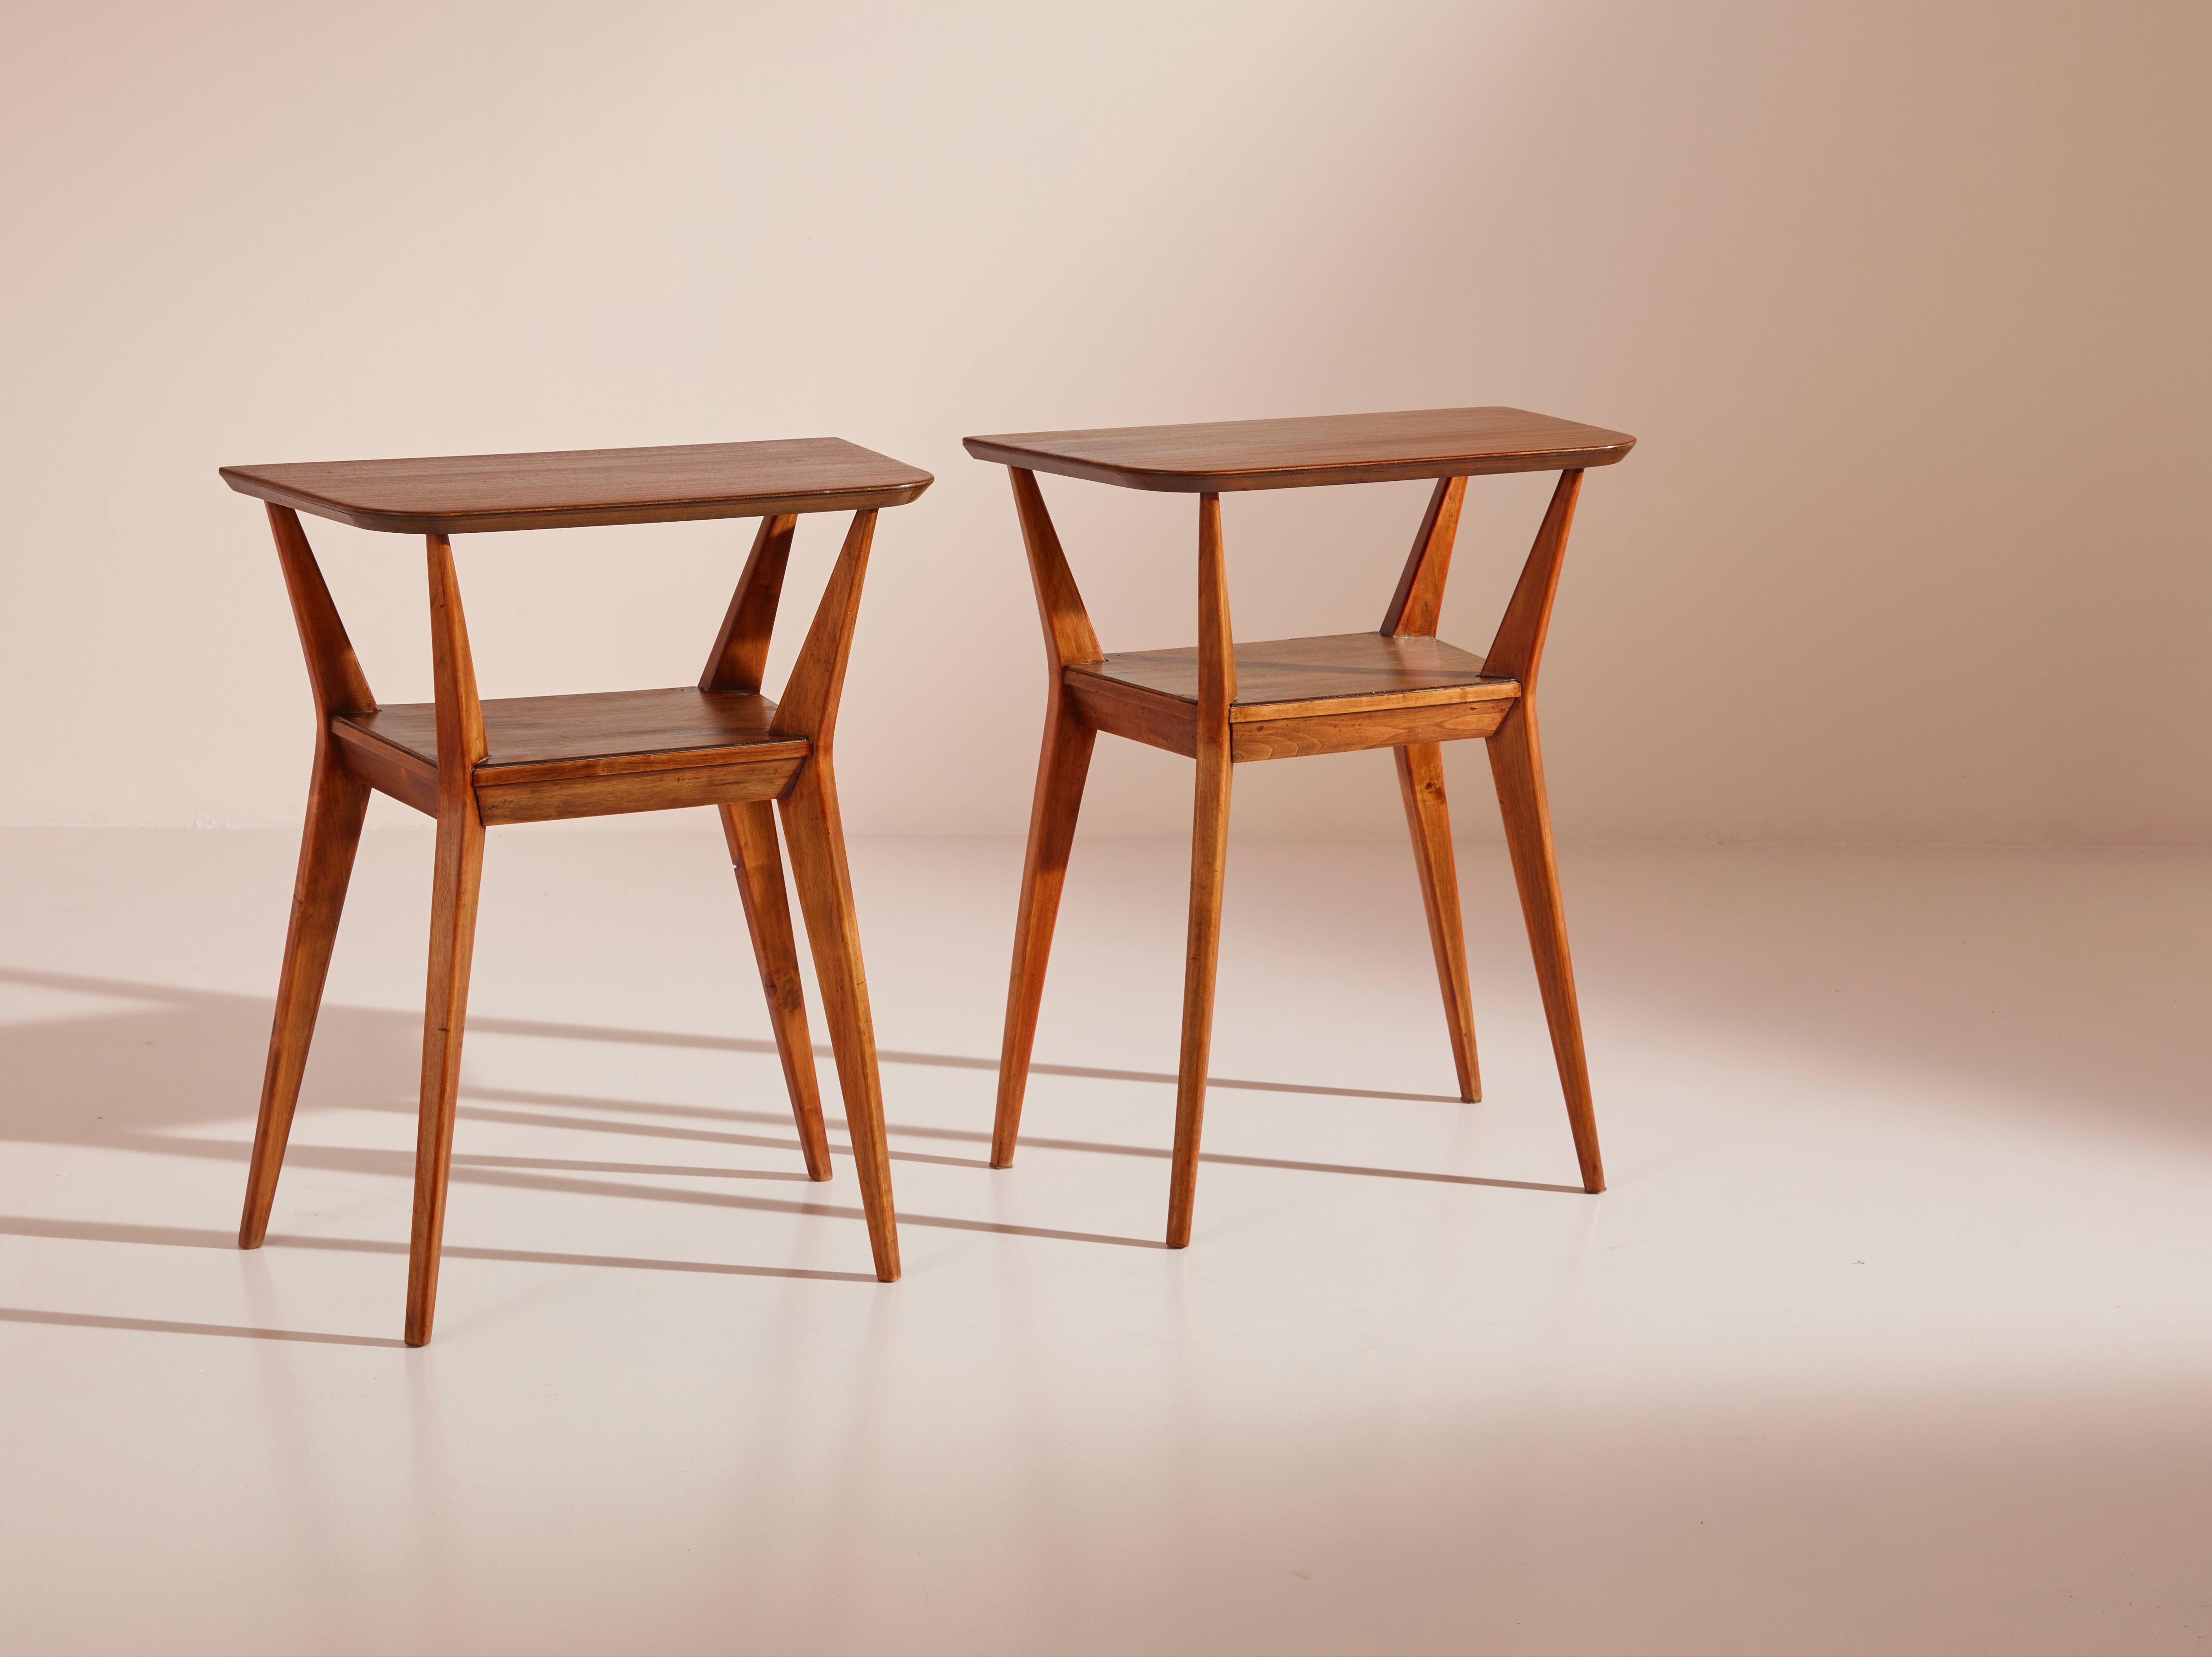 Mid-20th Century Two Beechwood Side Tables in the Manner of Gio Ponti, Italy, 1950s For Sale